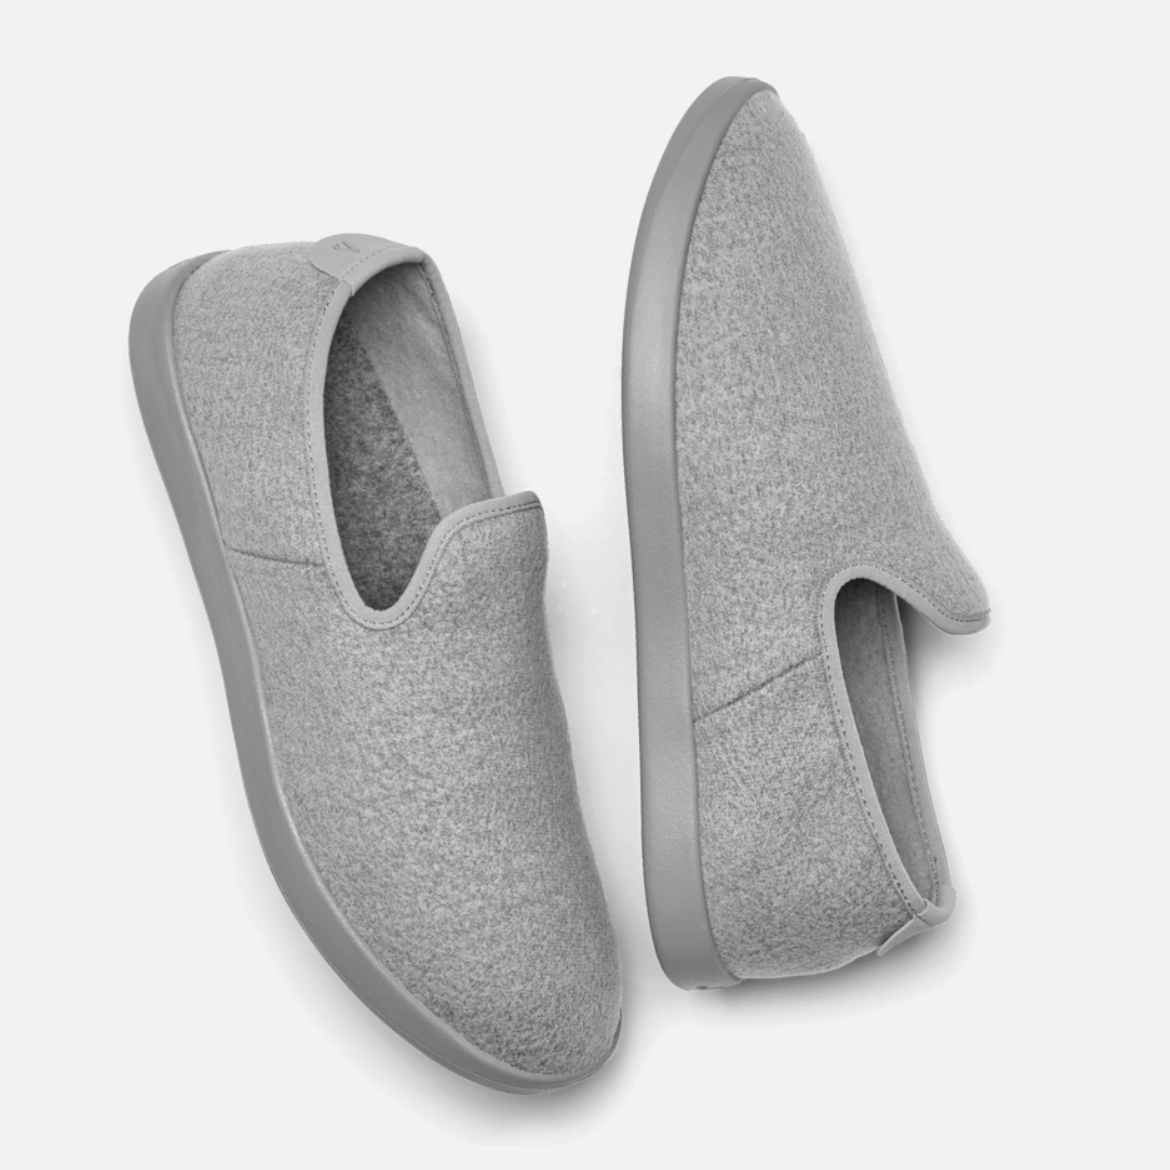 Allbirds Loungers In Review: Do You 